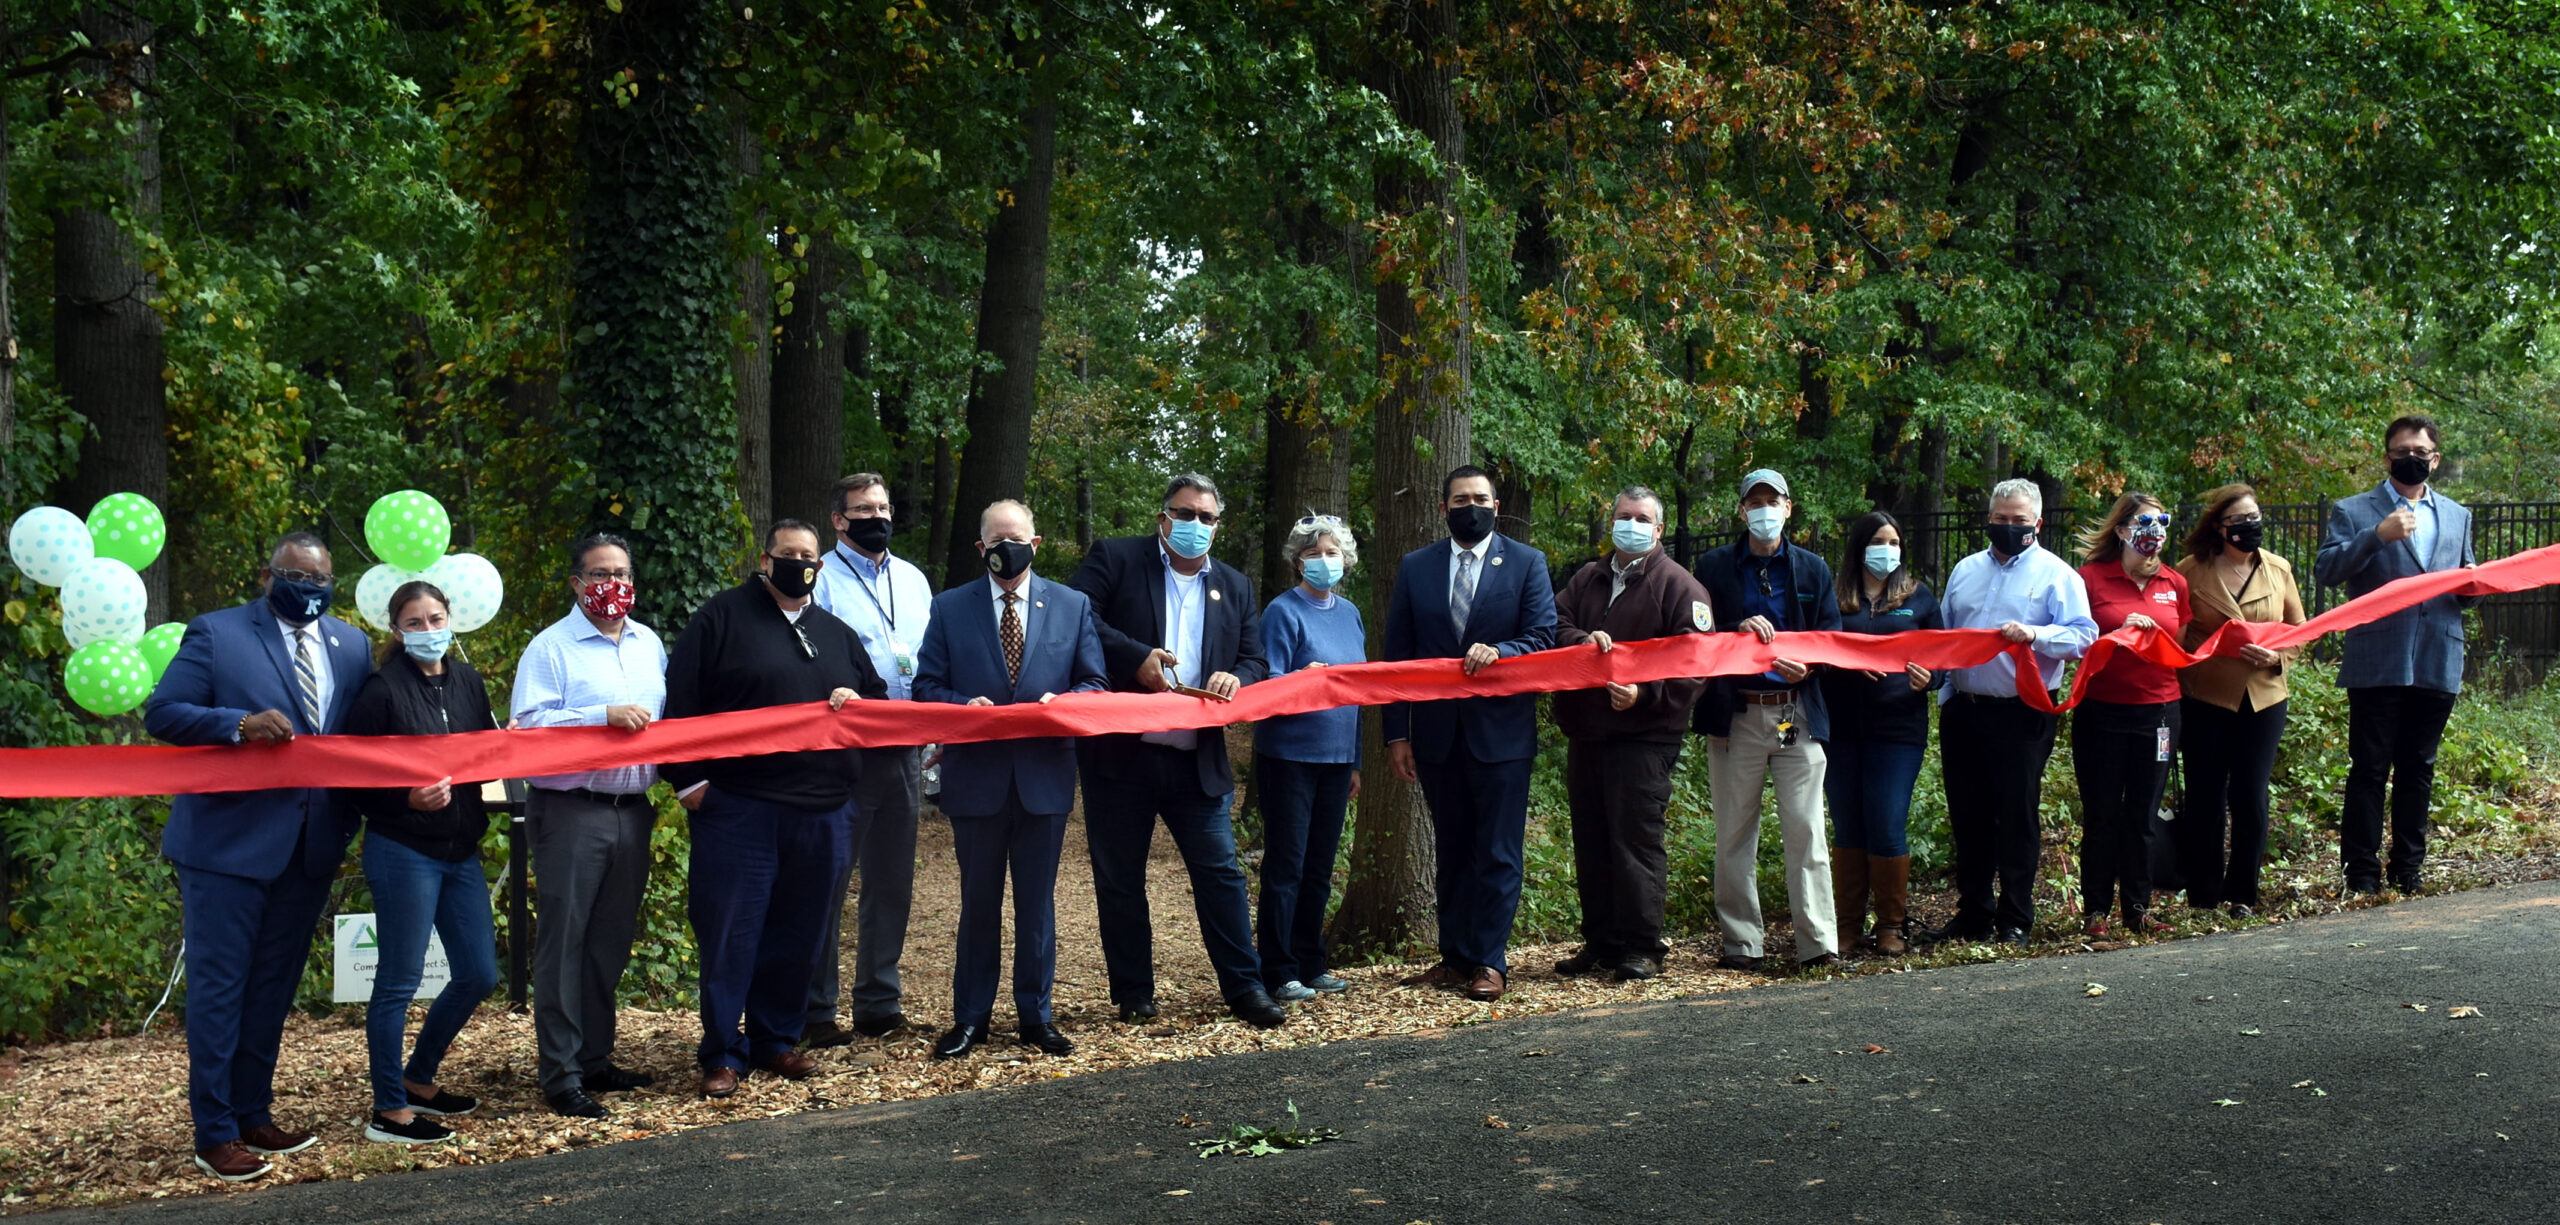 Union County Freeholders Dedicate Nature Trail at Phil Rizzuto